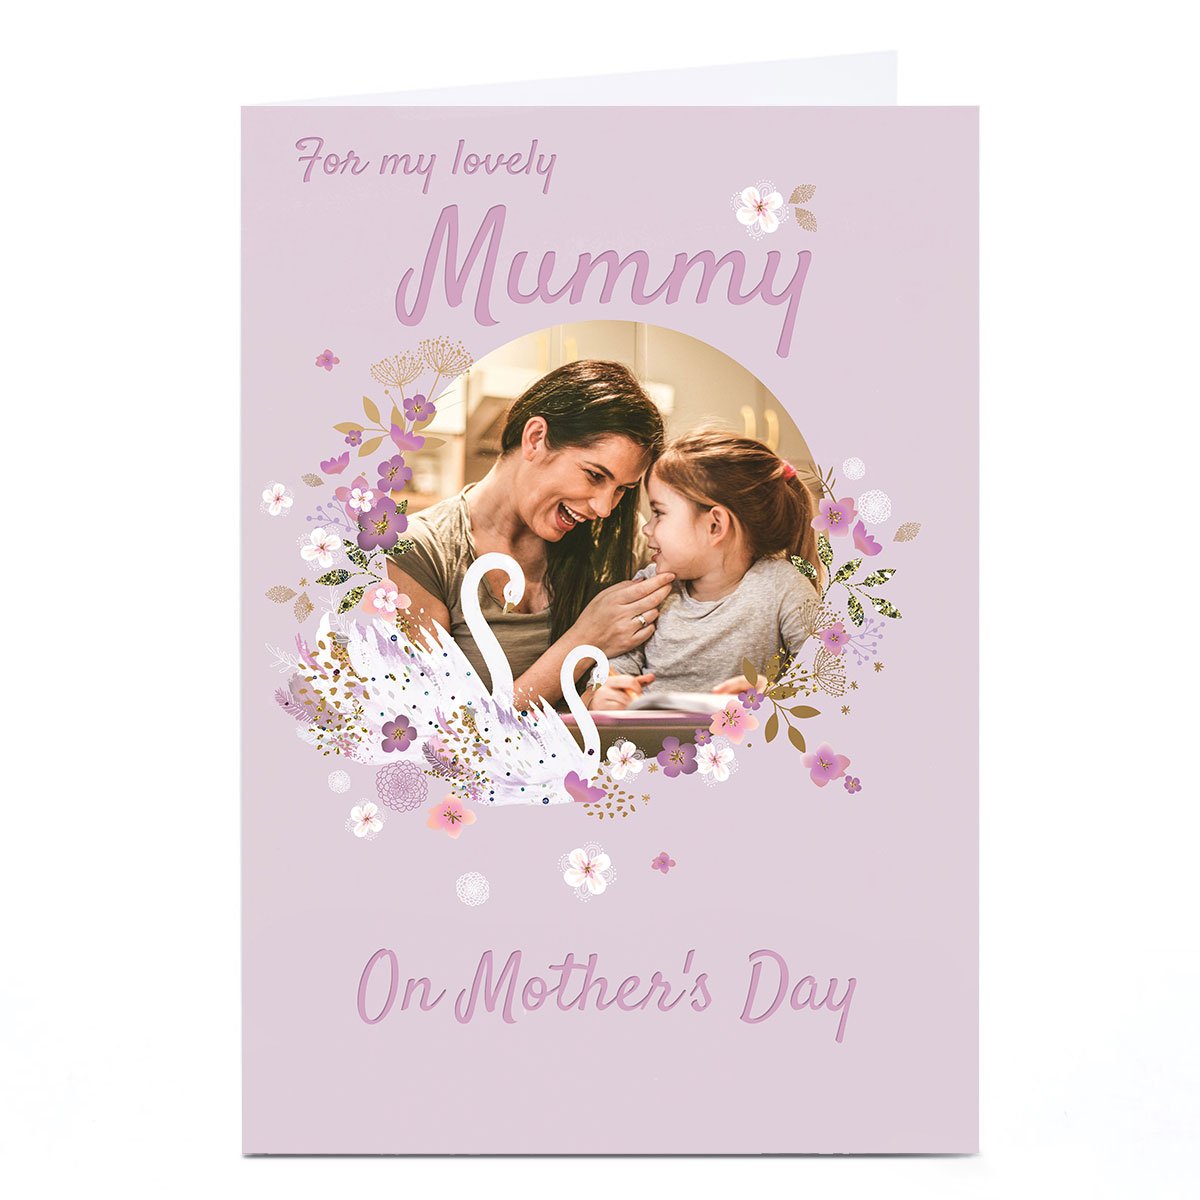 Personalised Kerry Spurling Mother's Day Photo Card - Swans, Mummy